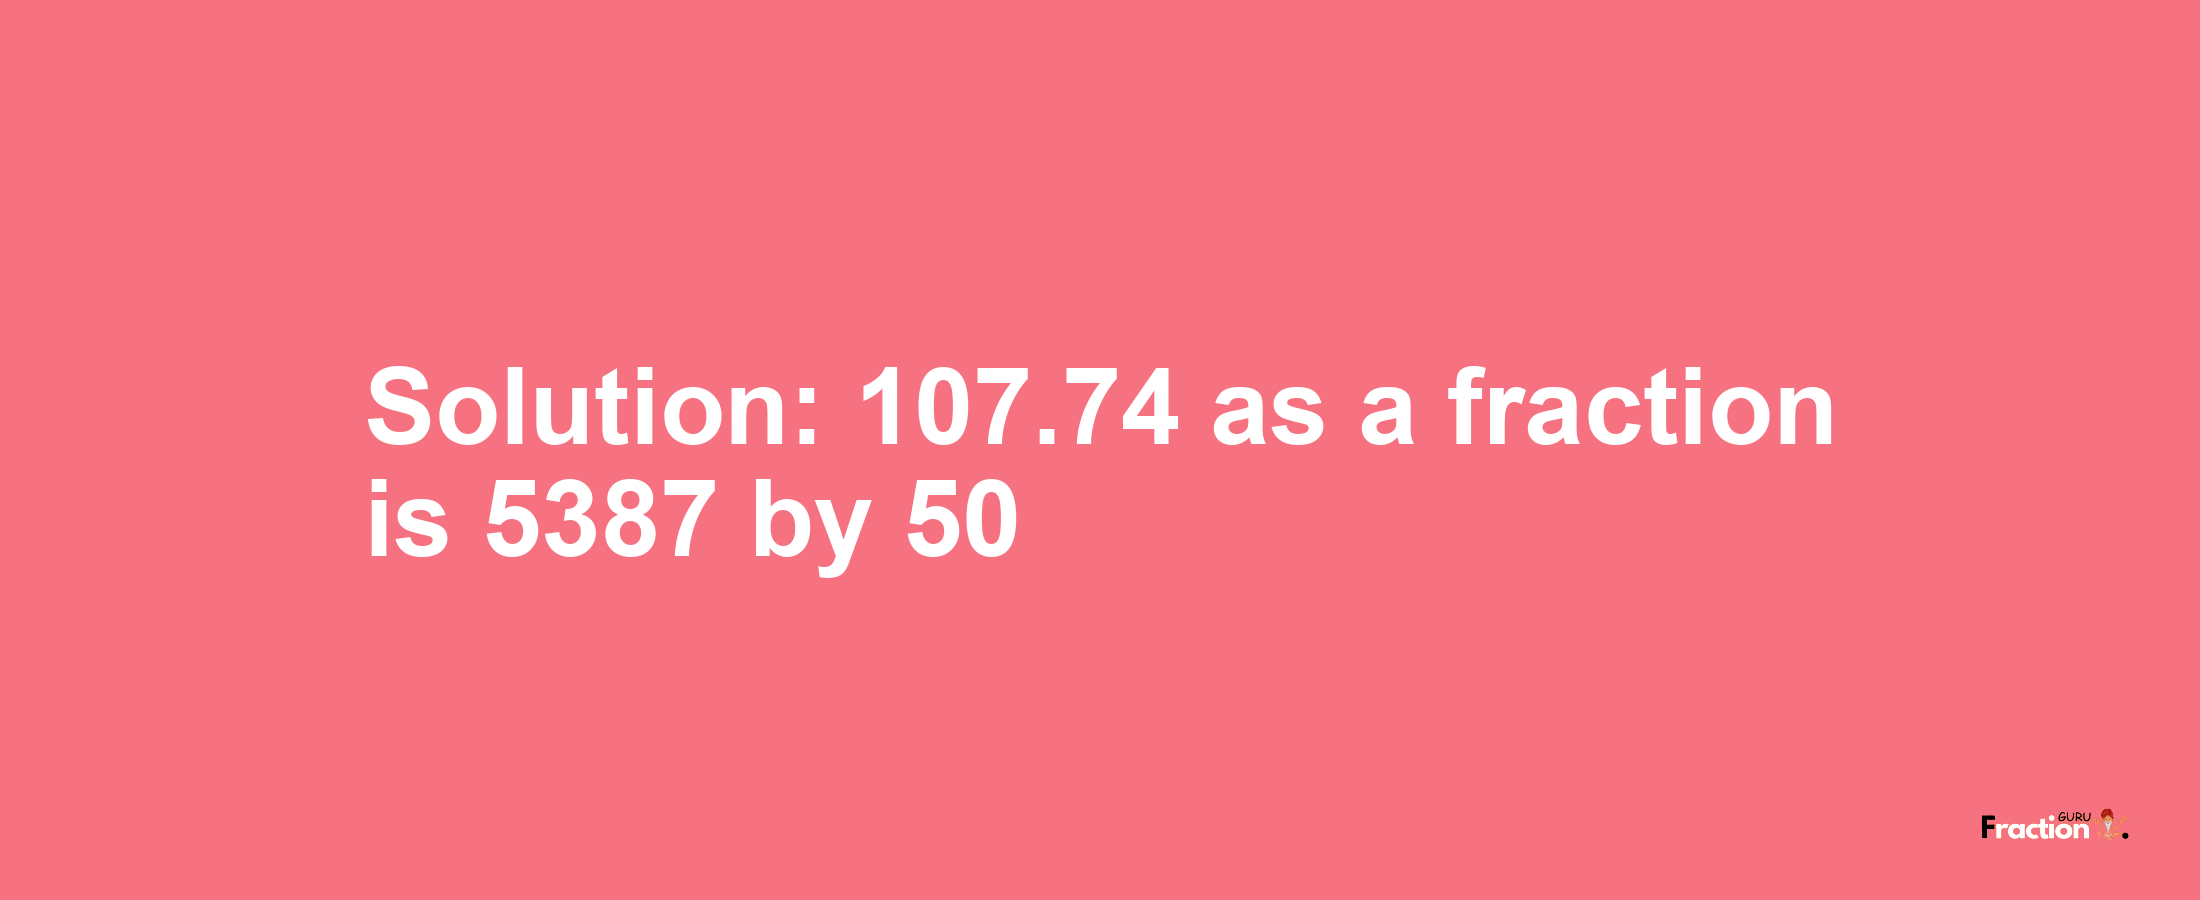 Solution:107.74 as a fraction is 5387/50